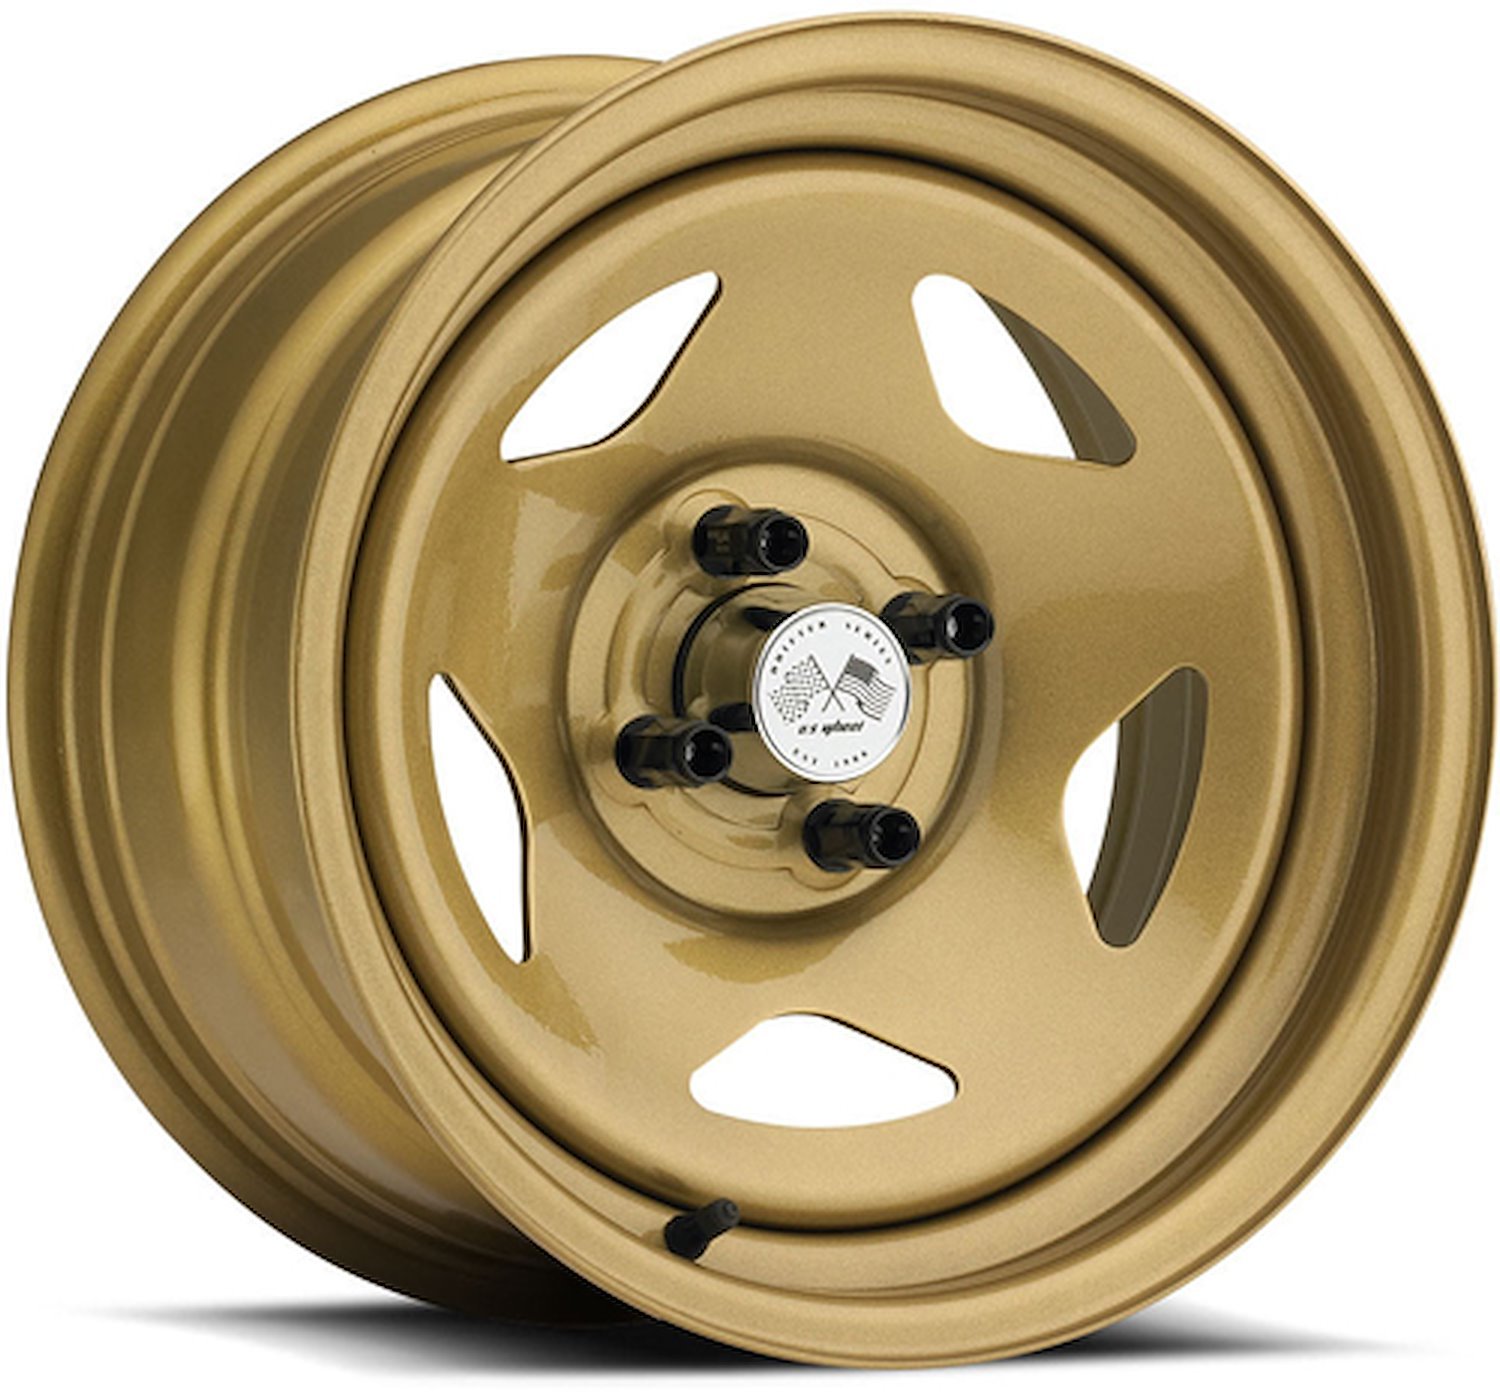 PAINTED STAR FWD DRIFTER GOLD 15 x 8 4 x 45 Bolt Circle 5 Back Spacing +16 offset 266 Center Bore 1400 lbs Load Rating